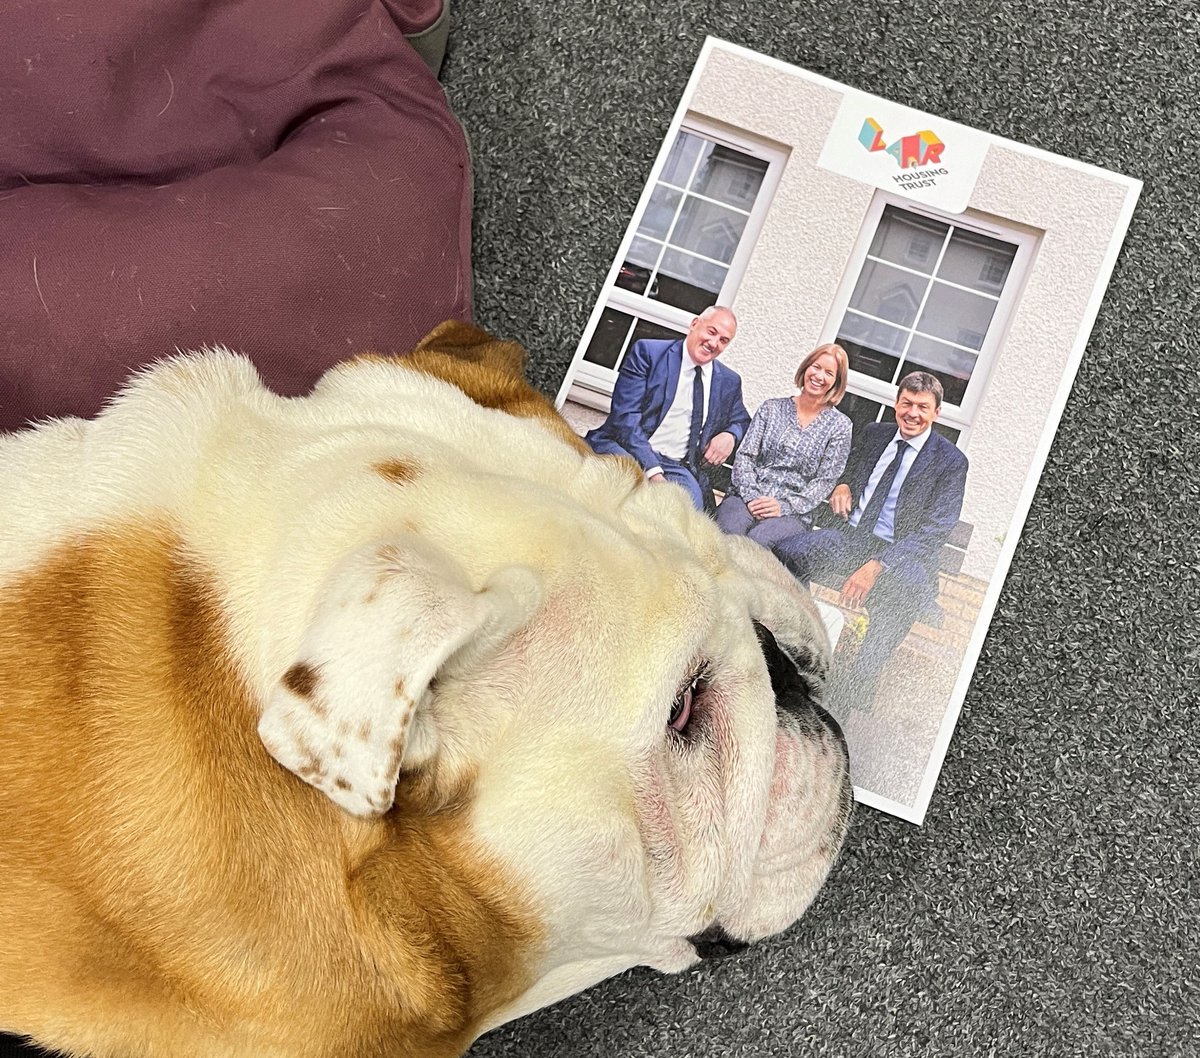 Cooper relaxing with our 2023 Annual Review at Lar HQ today #officedogs #HappyMonday